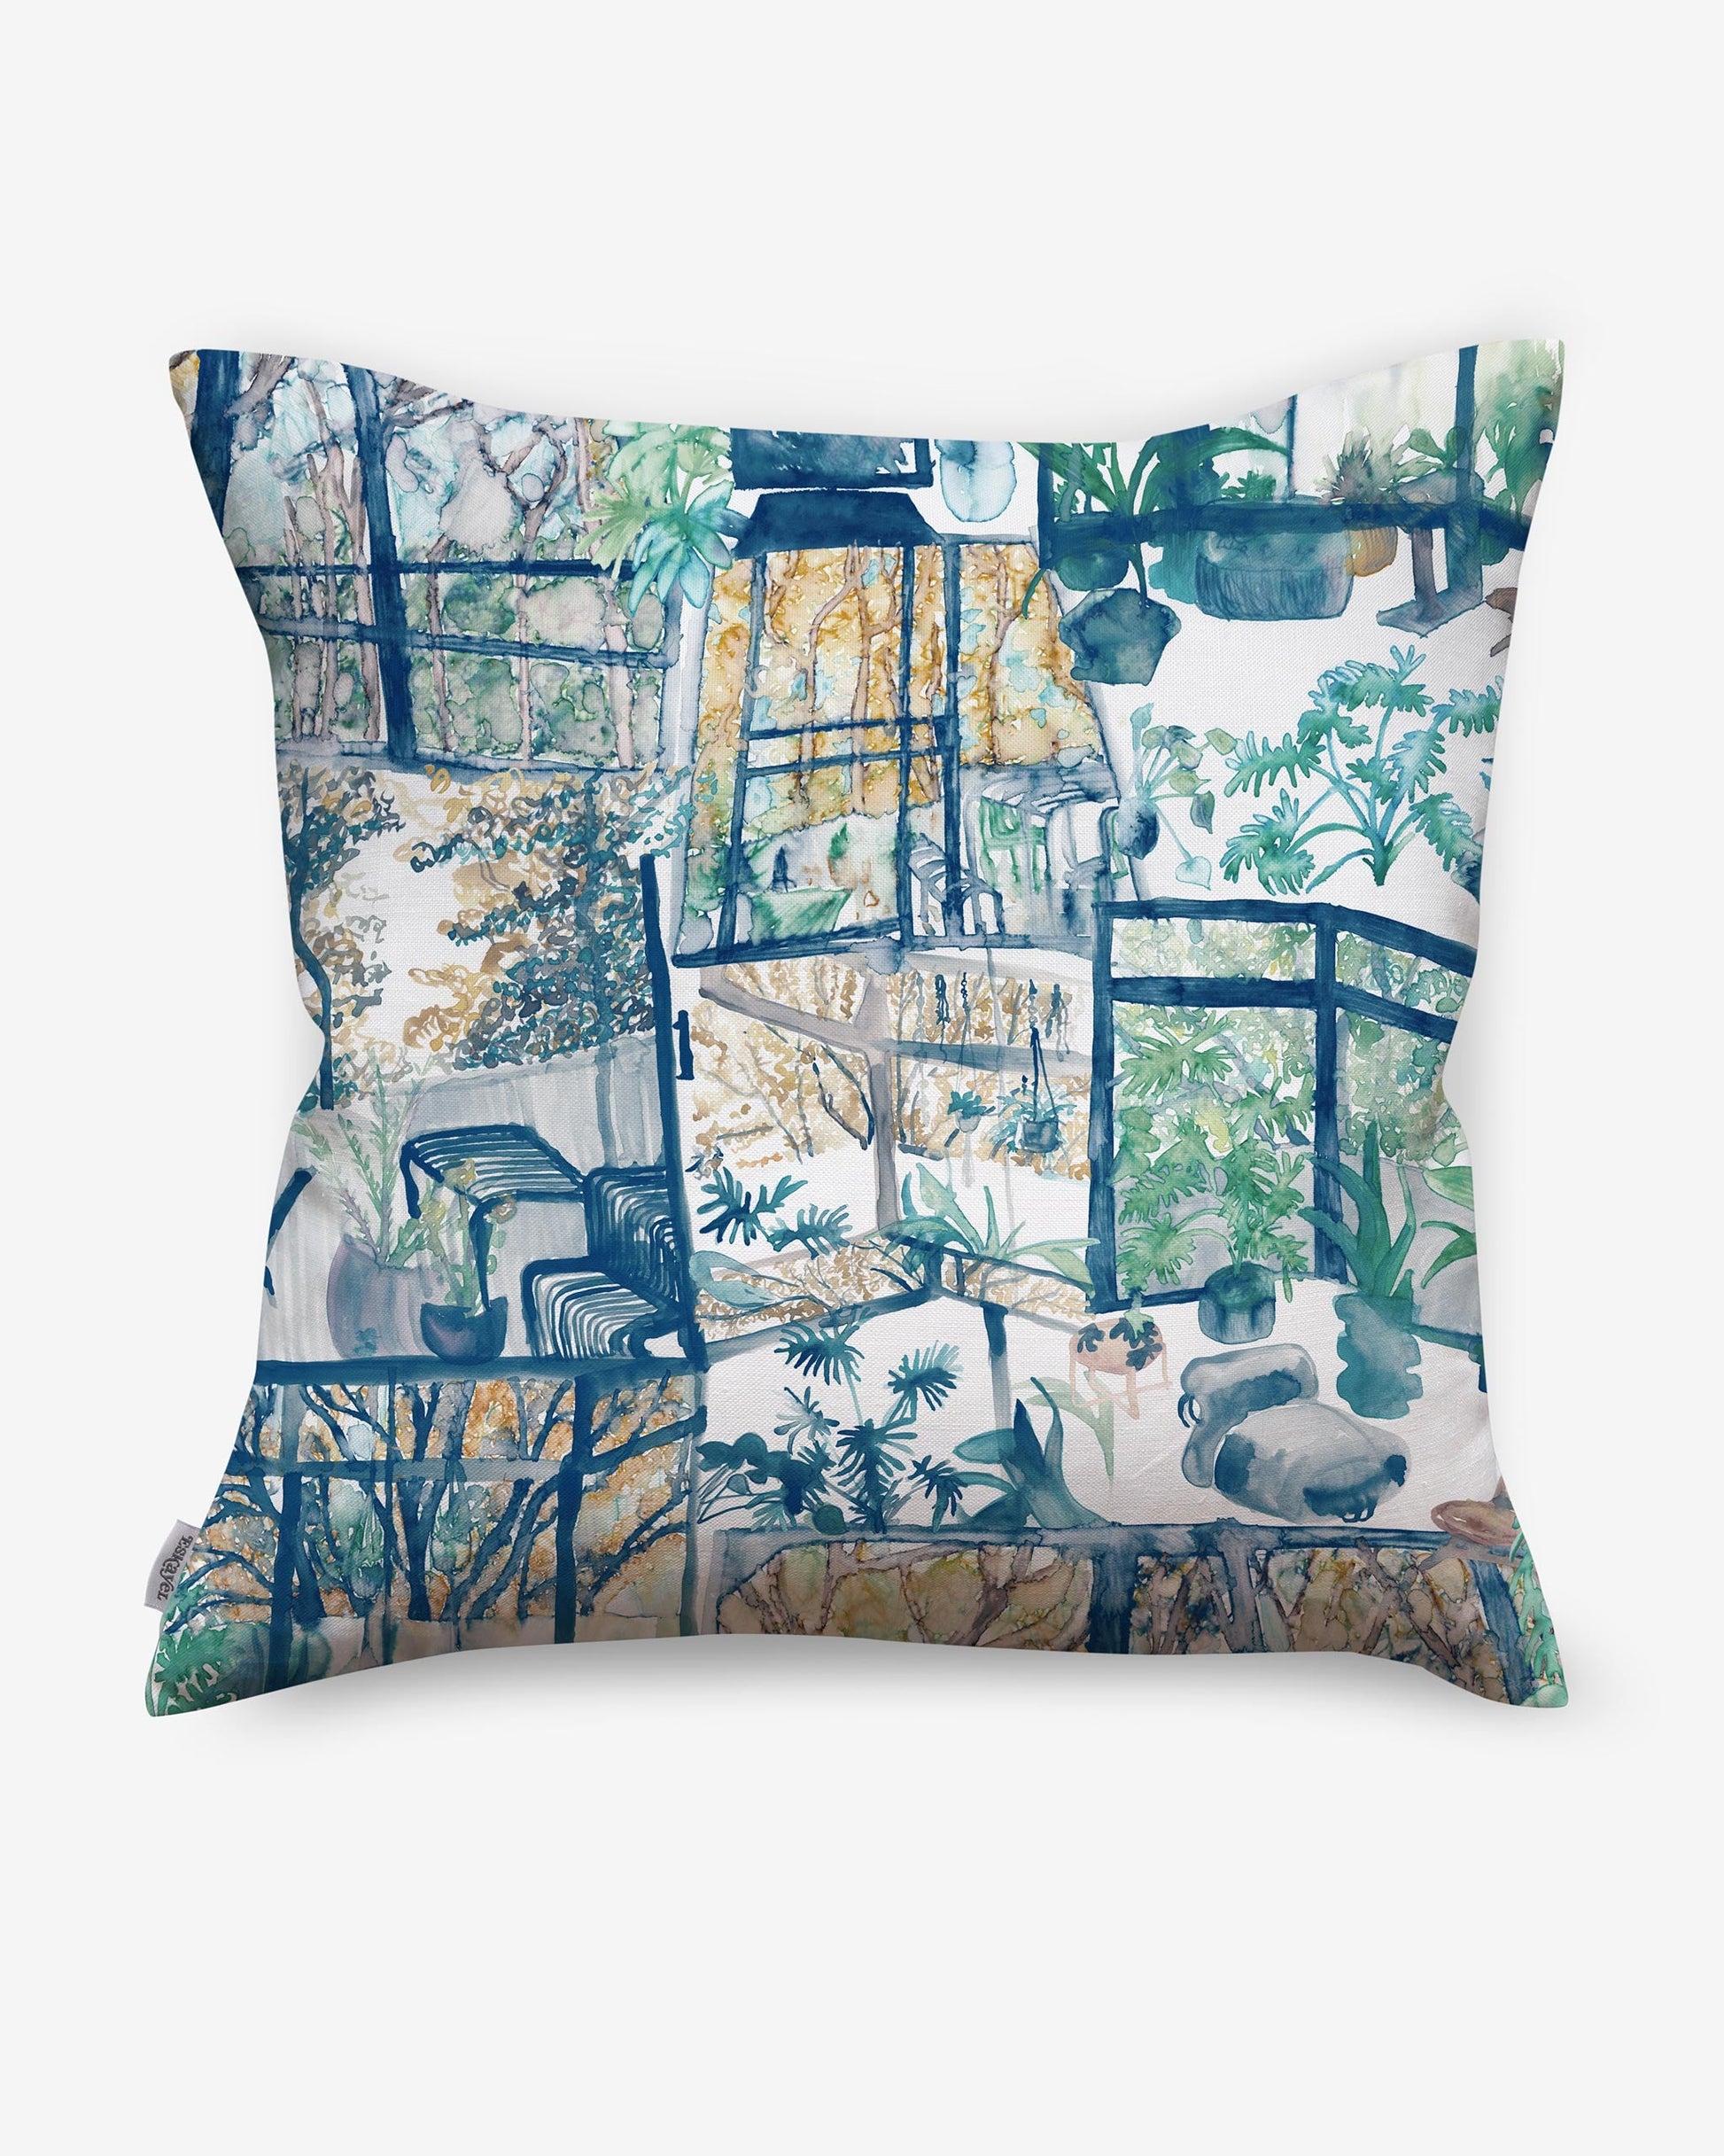 A blue and white Quotidiana Pillow Twilight with an image of a window made from high-end fabric, featuring the Quotidiana pattern